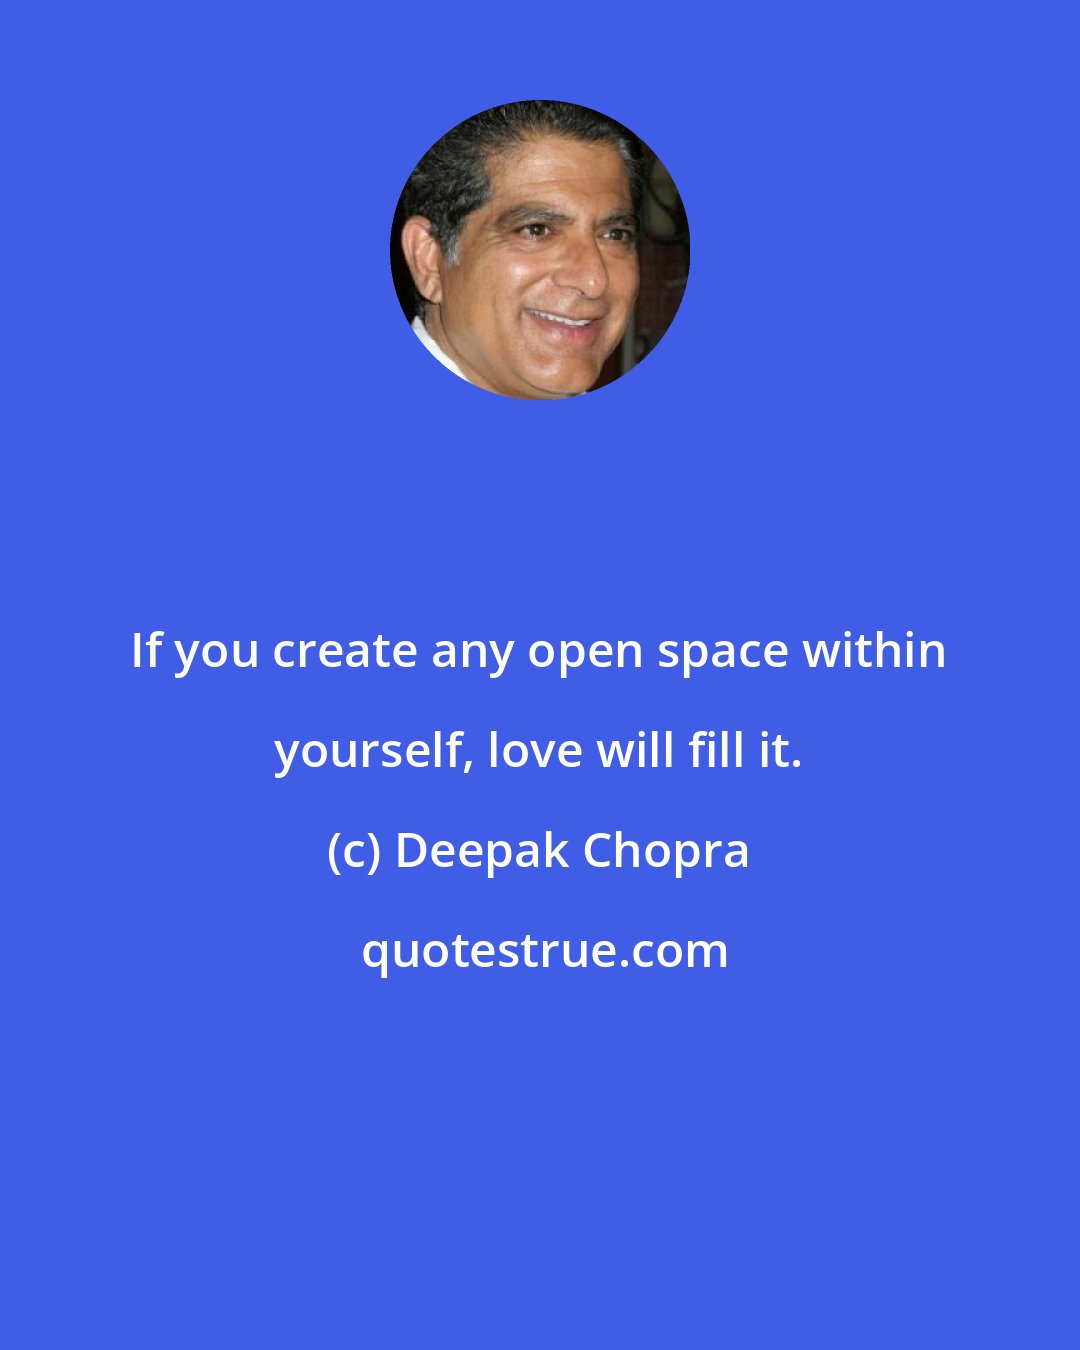 Deepak Chopra: If you create any open space within yourself, love will fill it.